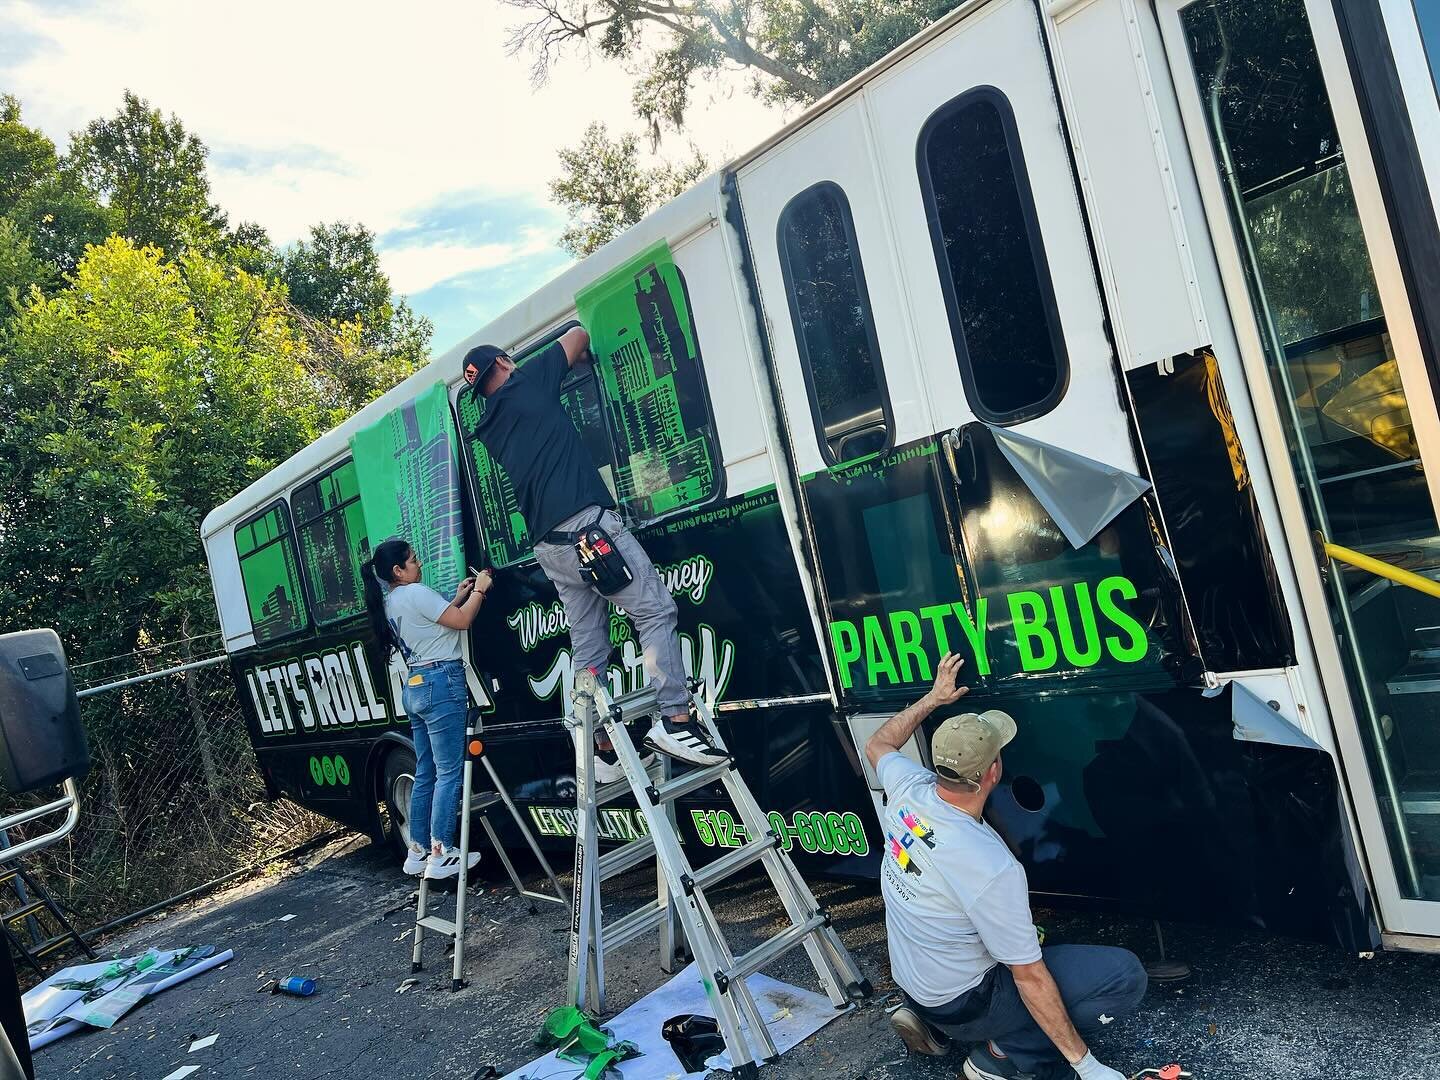 Peek-a-boo! 🚌✨ A sneak peek at the new wrap taking shape on our party bus! Every color, every line brings us closer to the big reveal. Can&rsquo;t wait to hit the streets of Austin with our fresh, funky look! Stay tuned&hellip; 

#LetsRollATX #BusWr